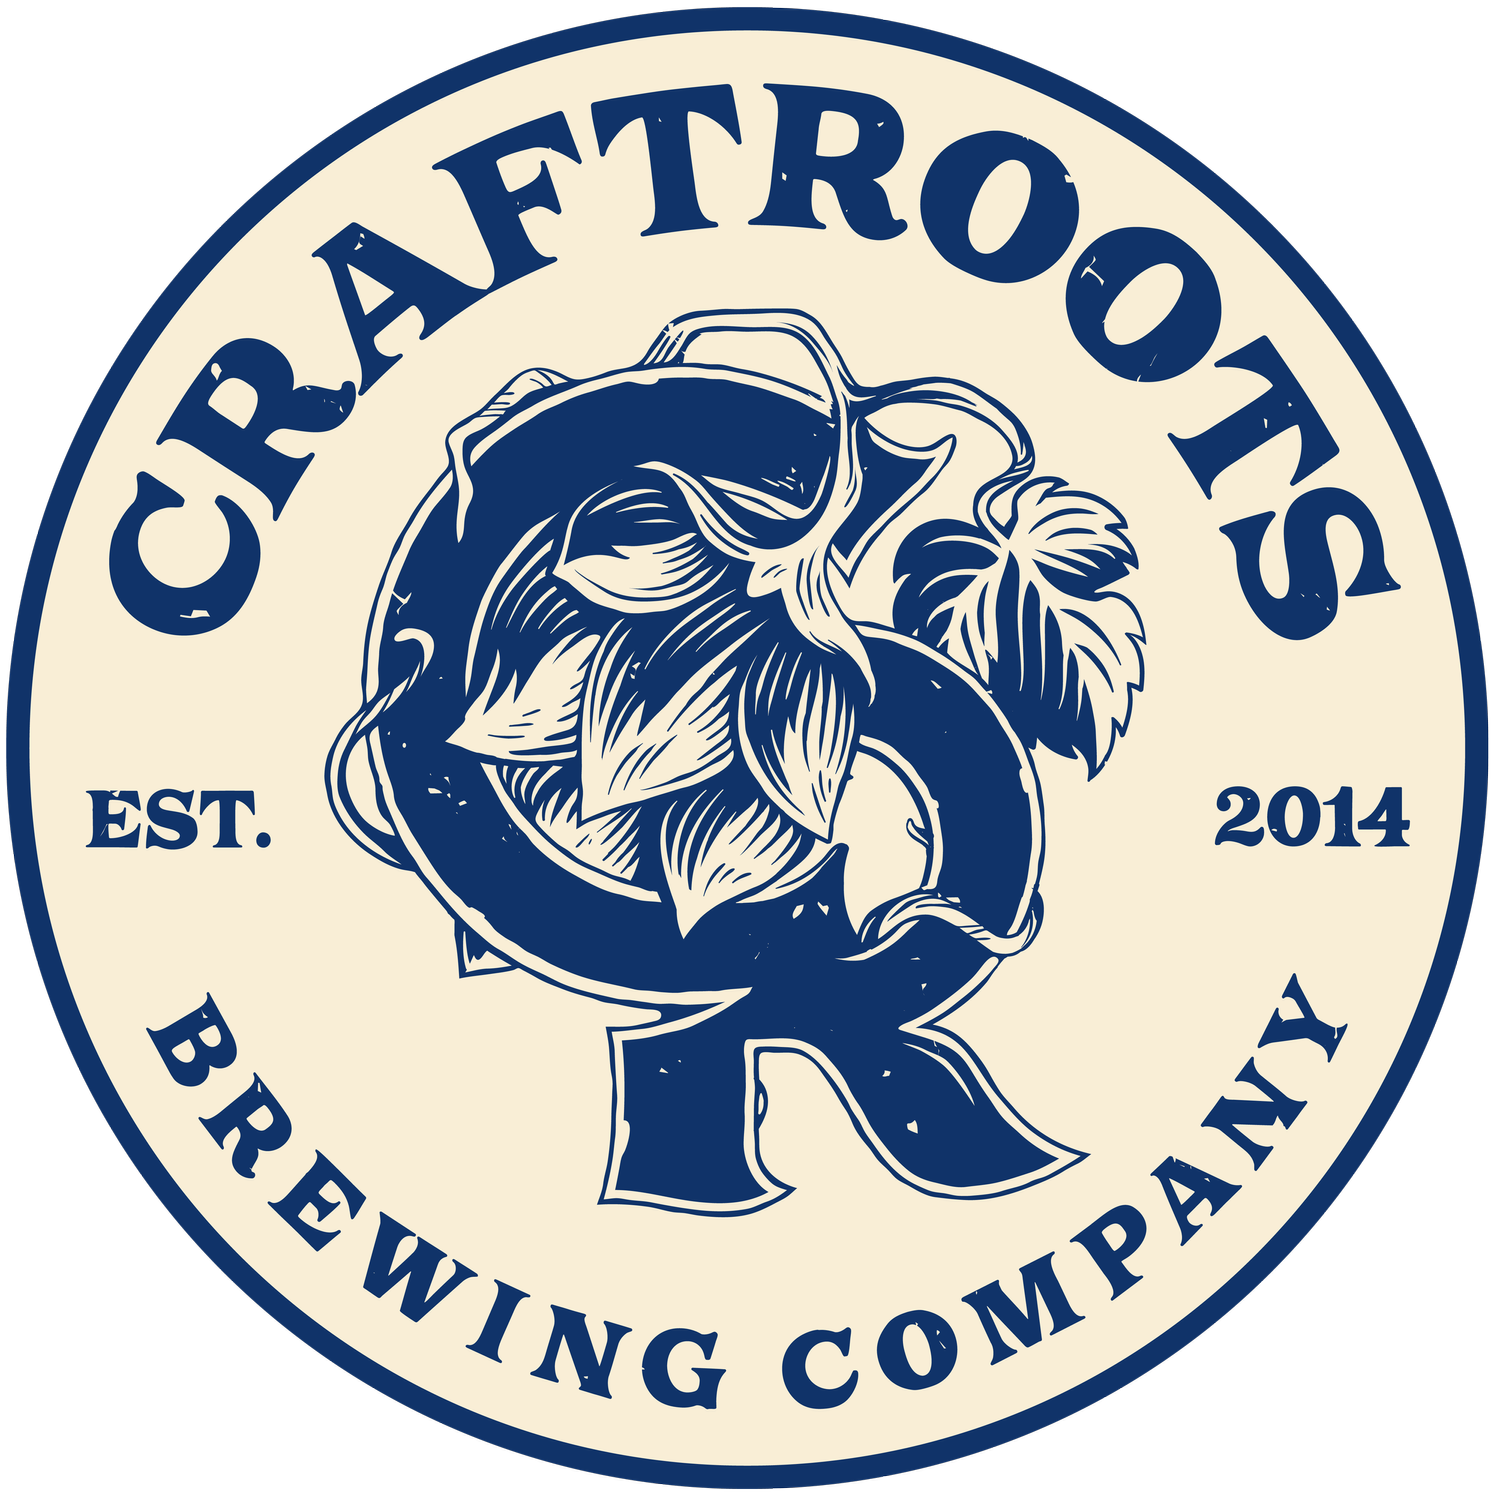 CraftRoots Brewing Company | Milford, Ma